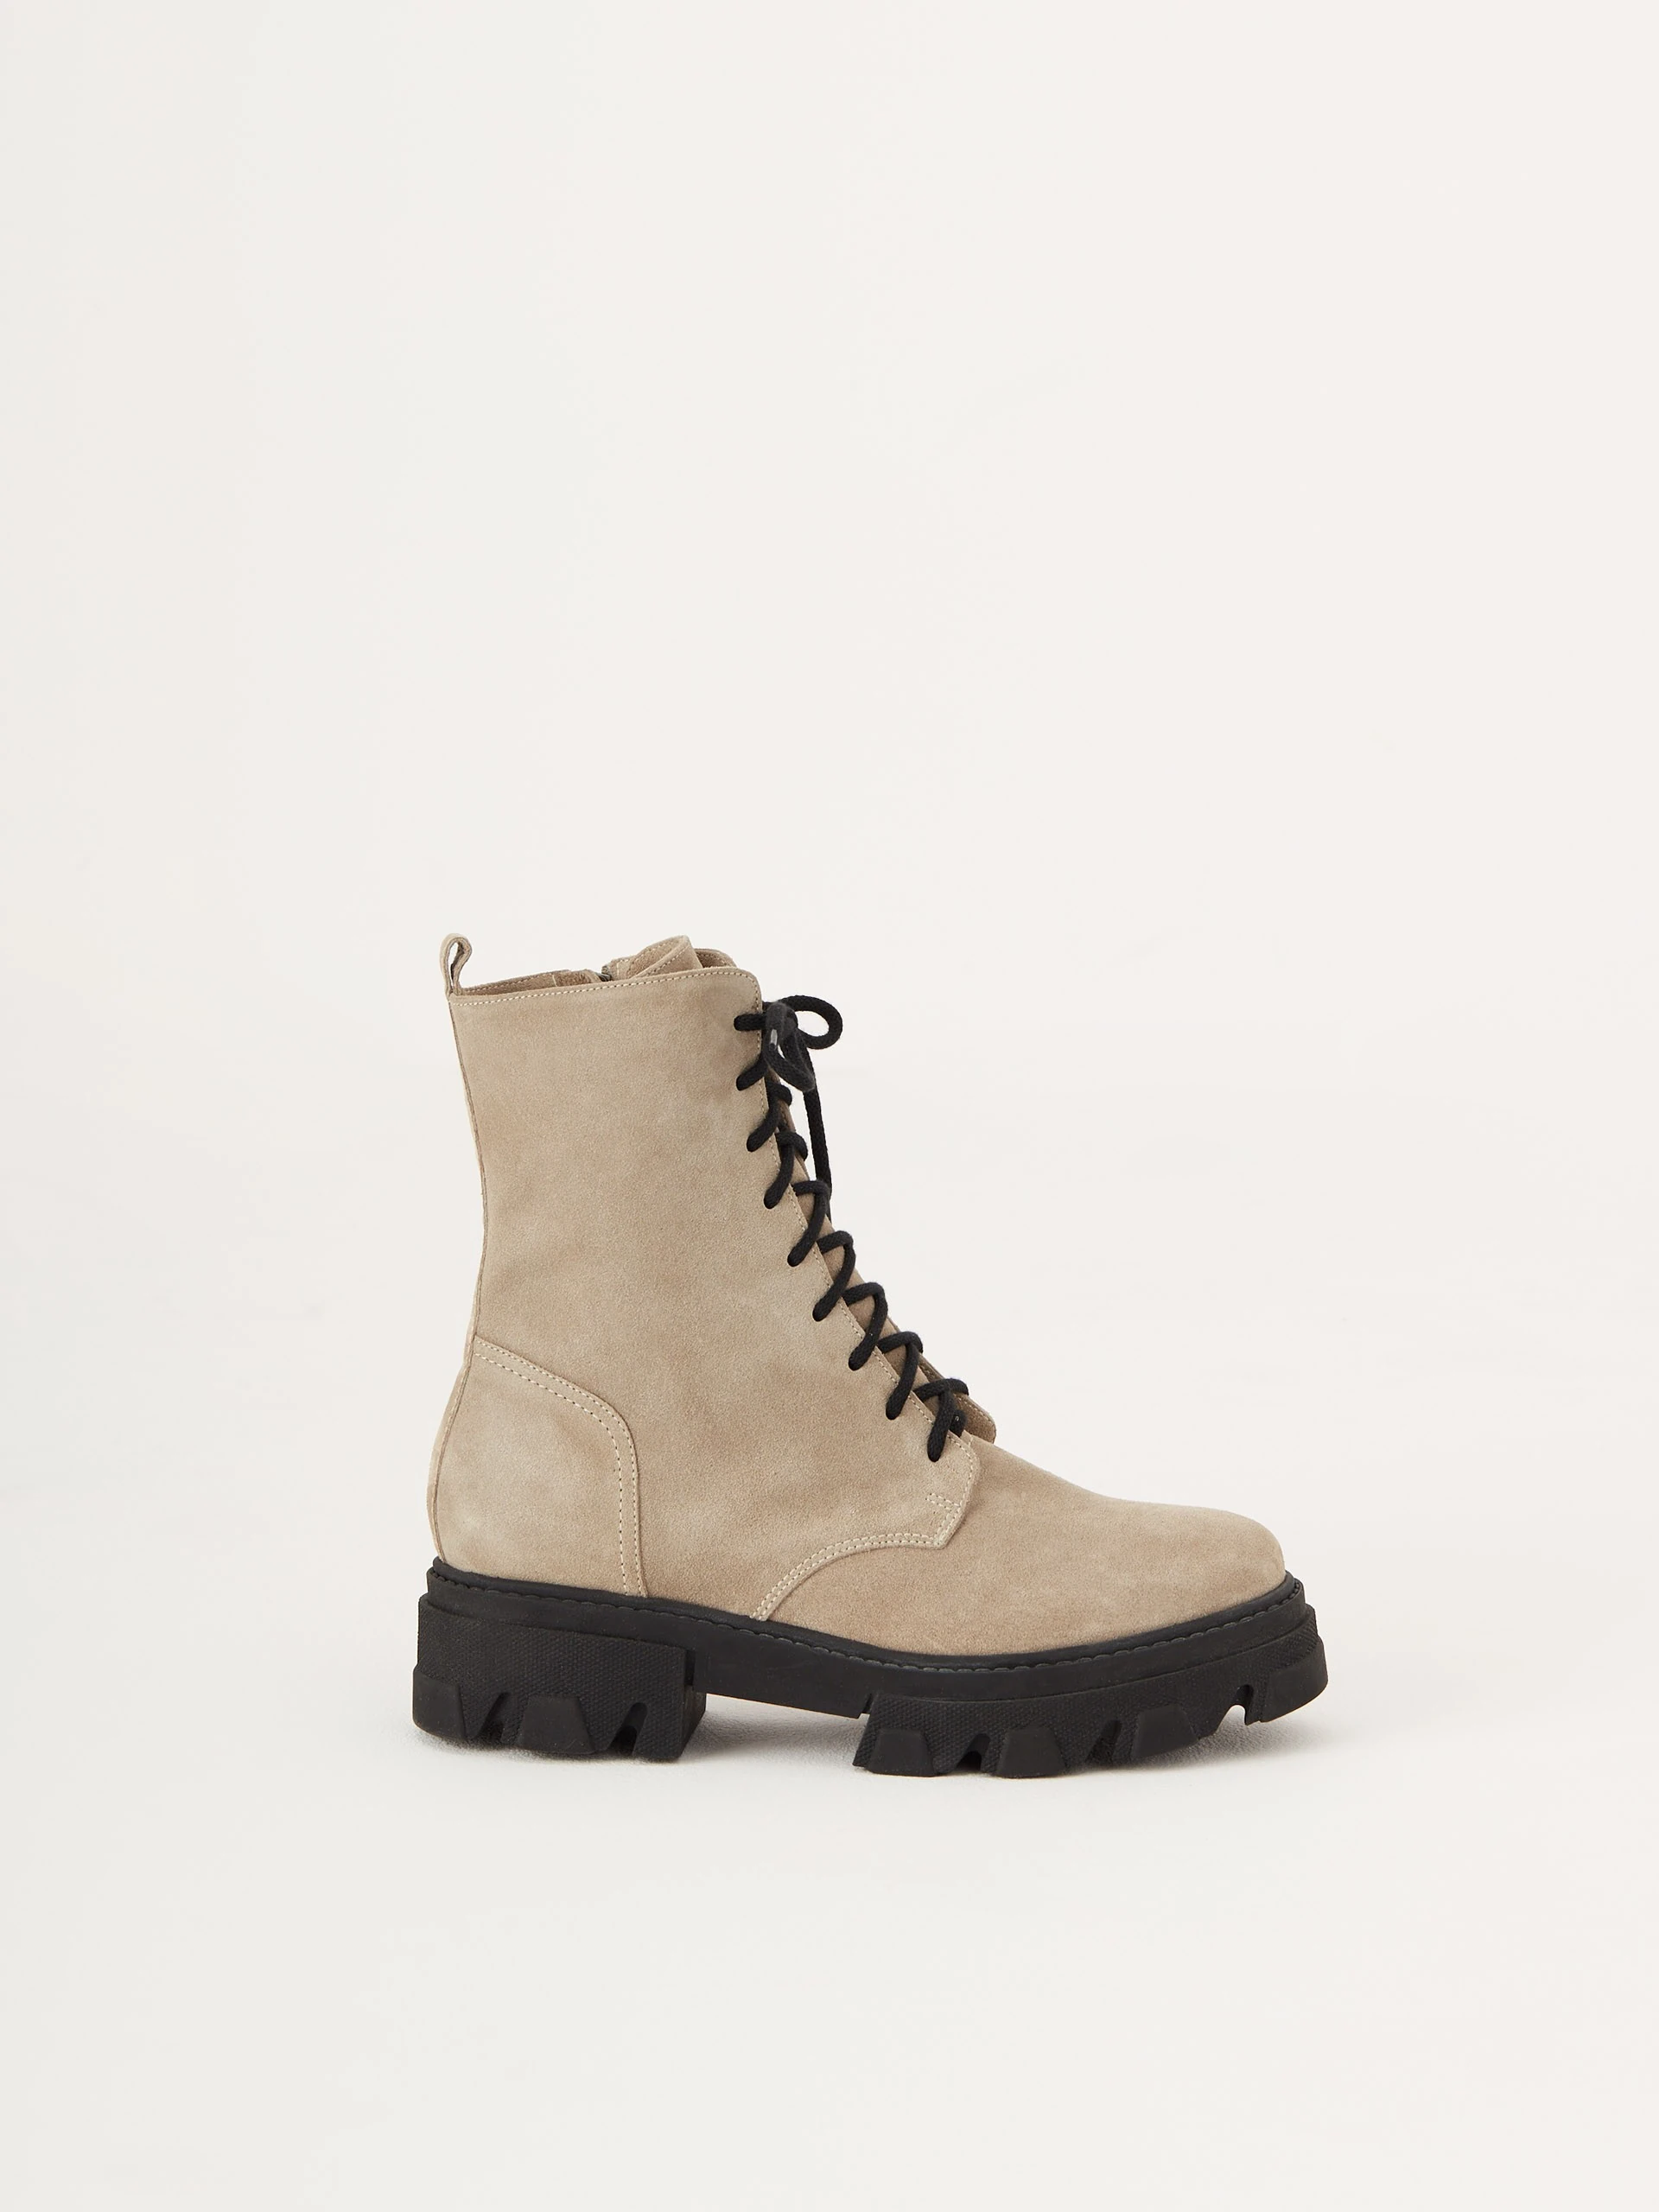 Beige boots from natural leather